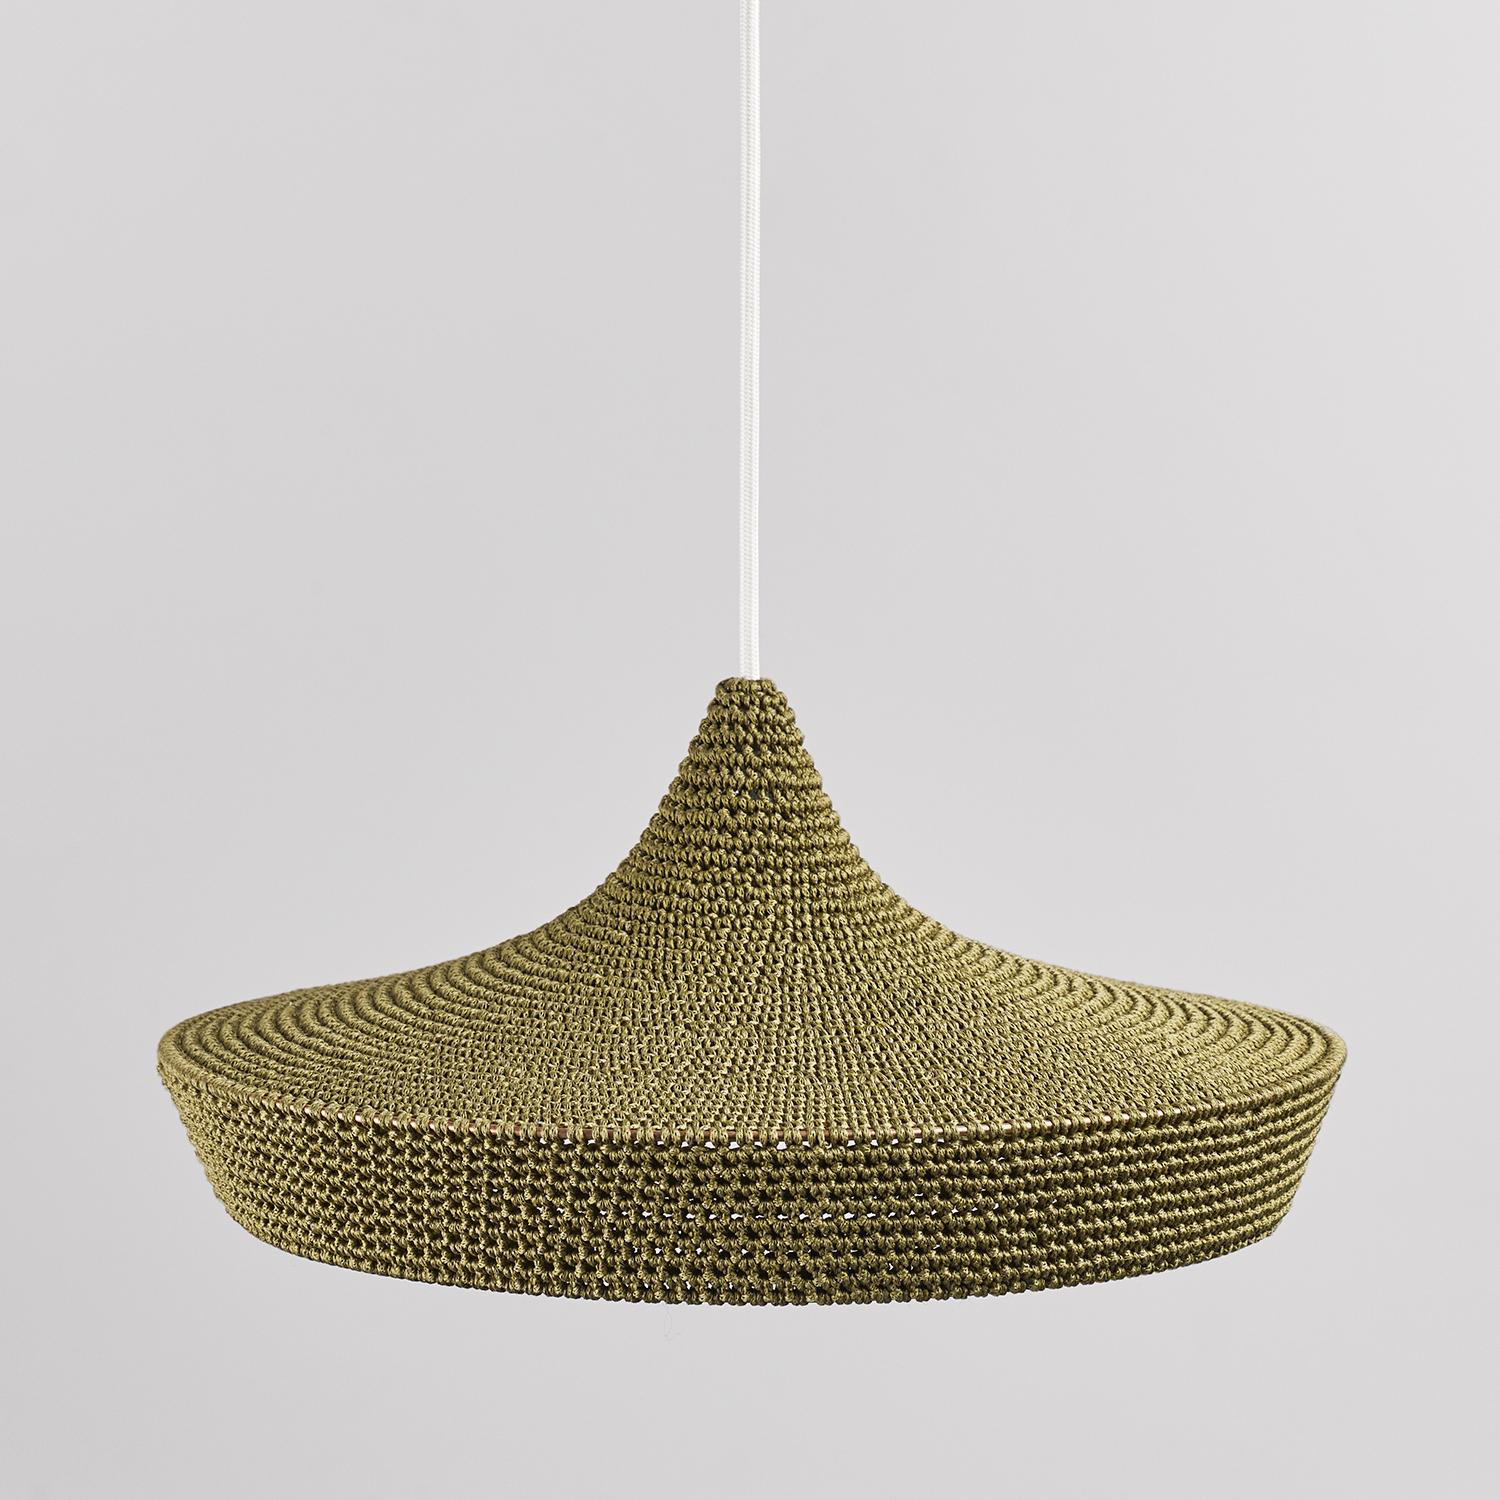 British CAVE Pendant Light Ø60cm/23.7in, Hand Crocheted in 100% Egyptian Cotton For Sale